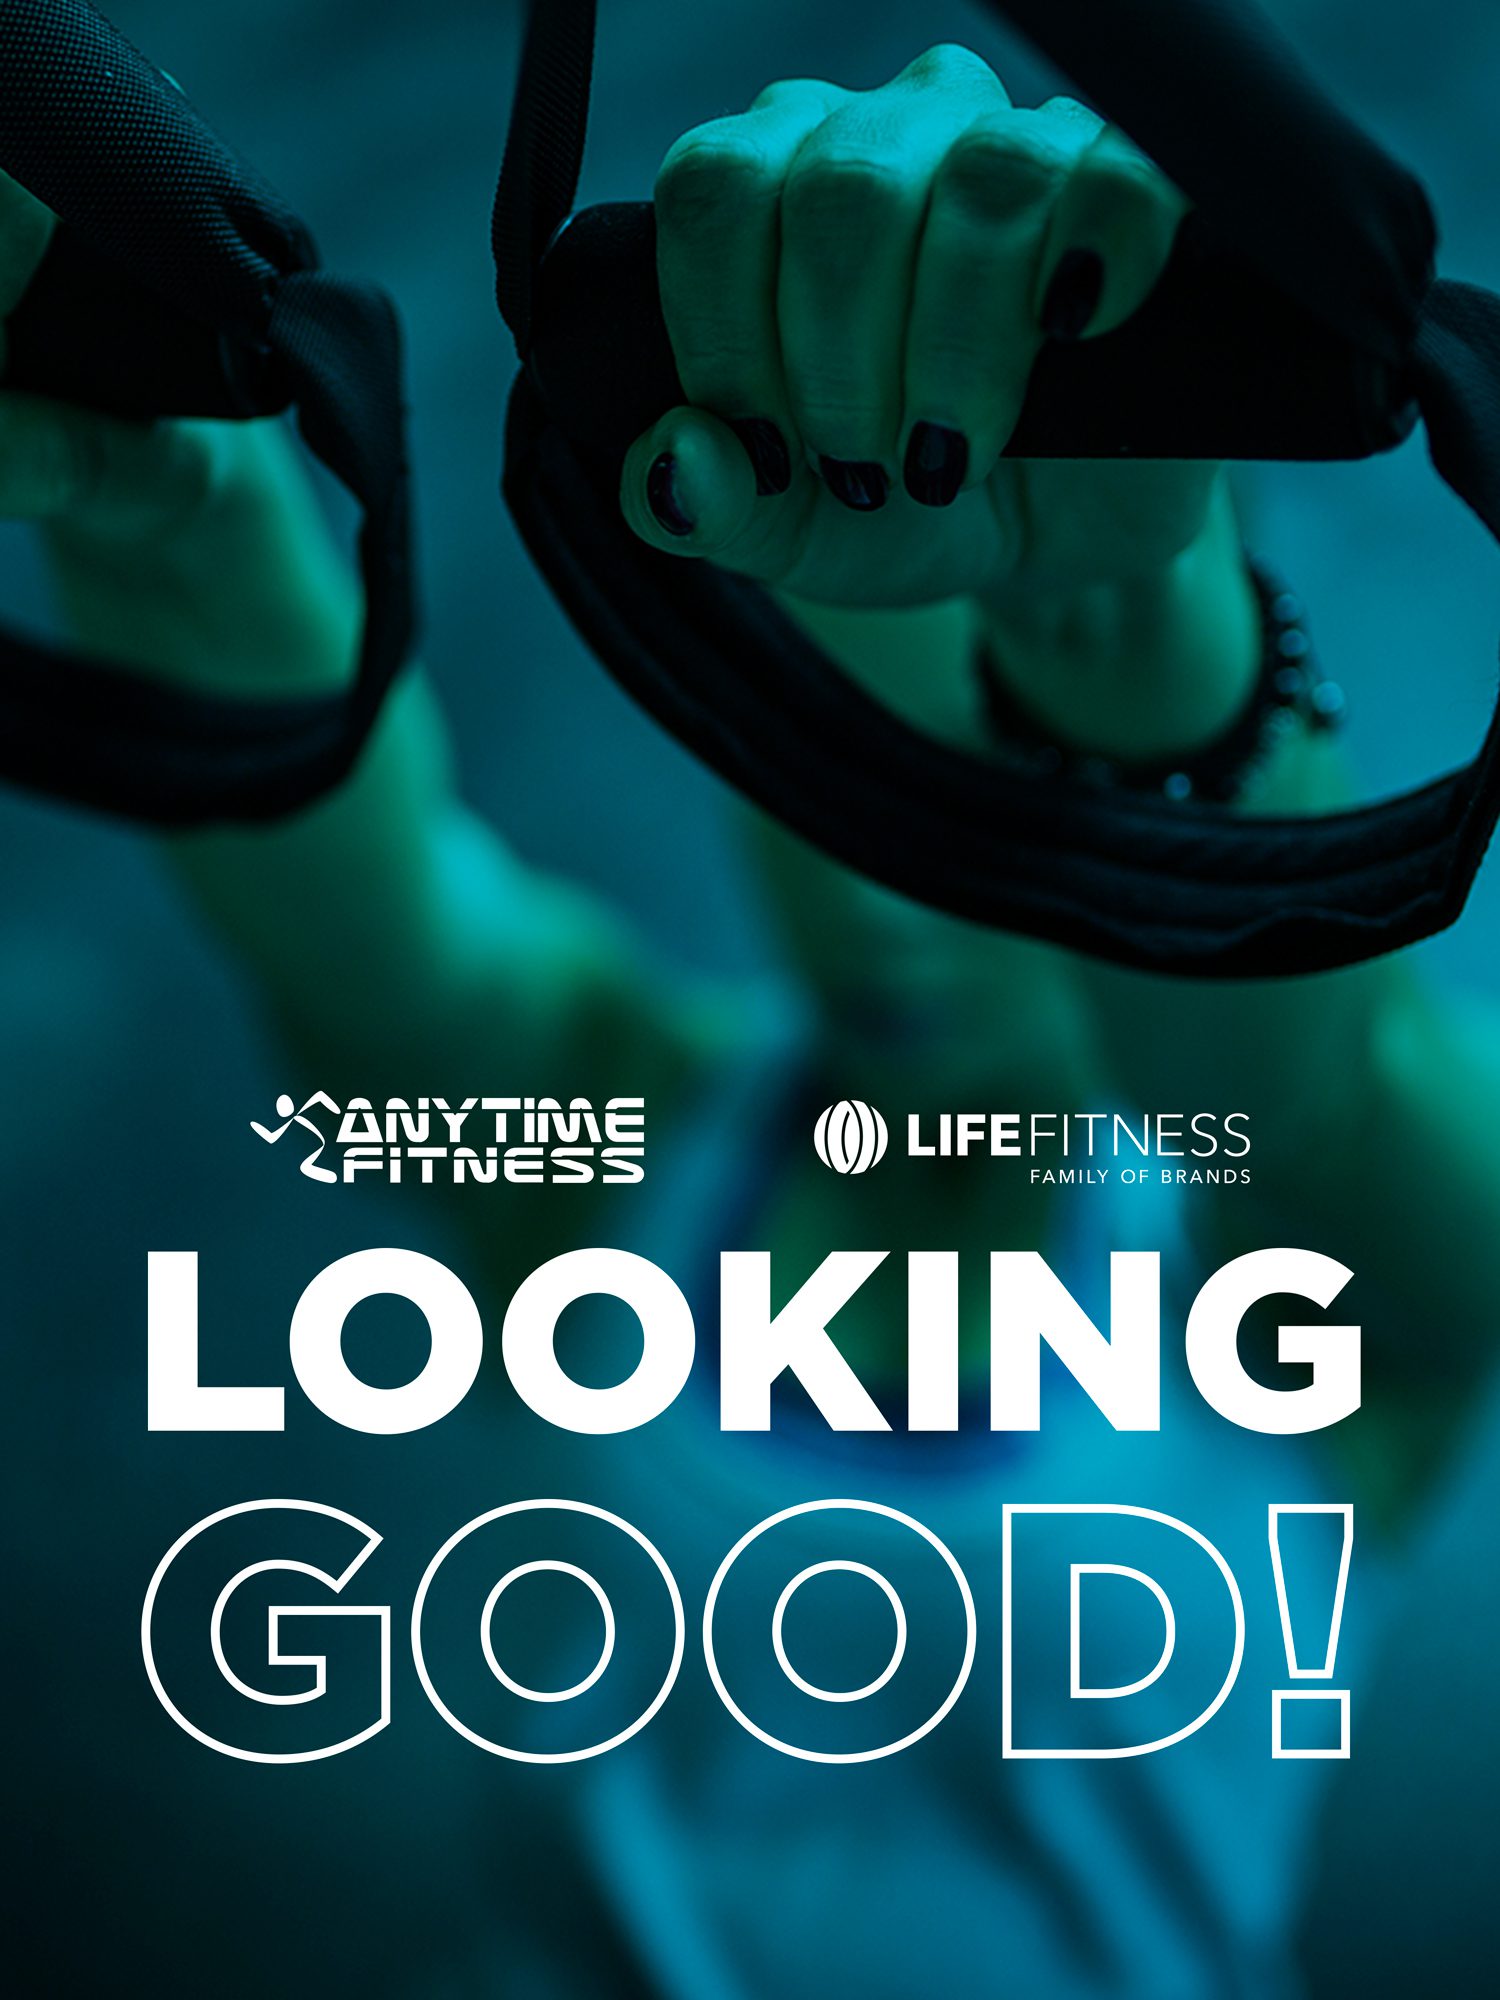 Anytime Fitness and Life Fitness marketing campaign